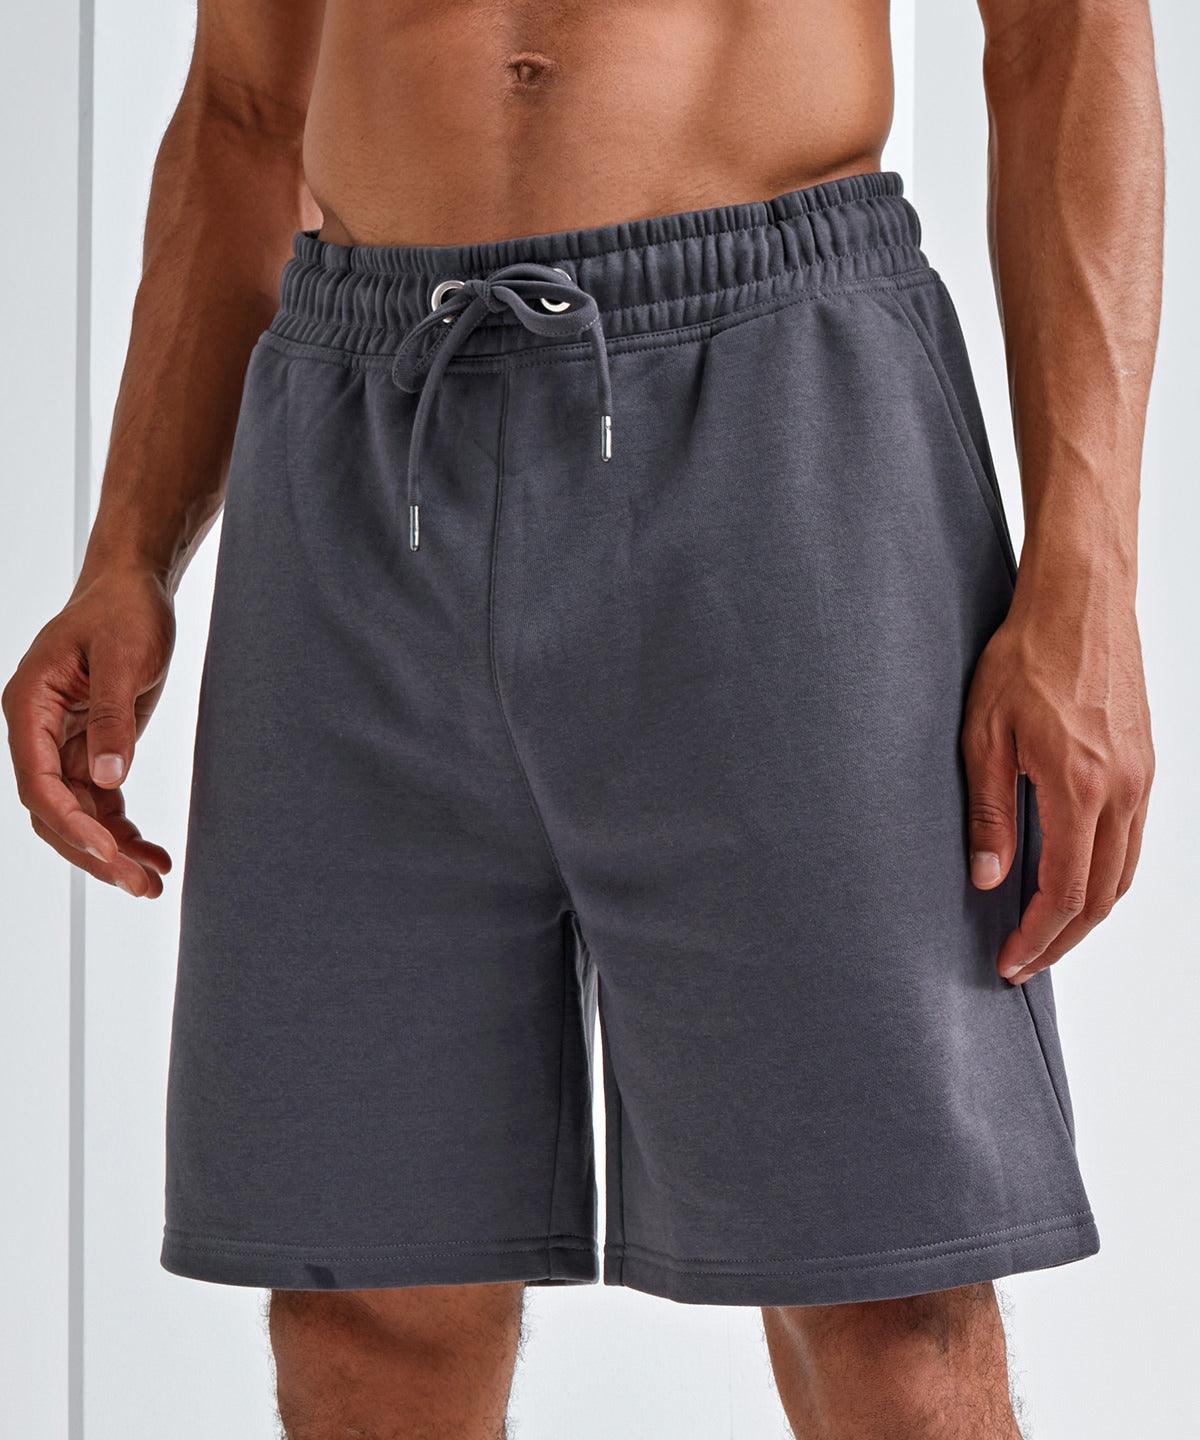 Charcoal - Men's TriDri® jogger shorts Shorts TriDri® Everyday Essentials, Exclusives, Must Haves, New For 2021, New In Autumn Winter, New In Mid Year, Street Casual, Streetwear, Tracksuits, Trousers & Shorts, Working From Home Schoolwear Centres